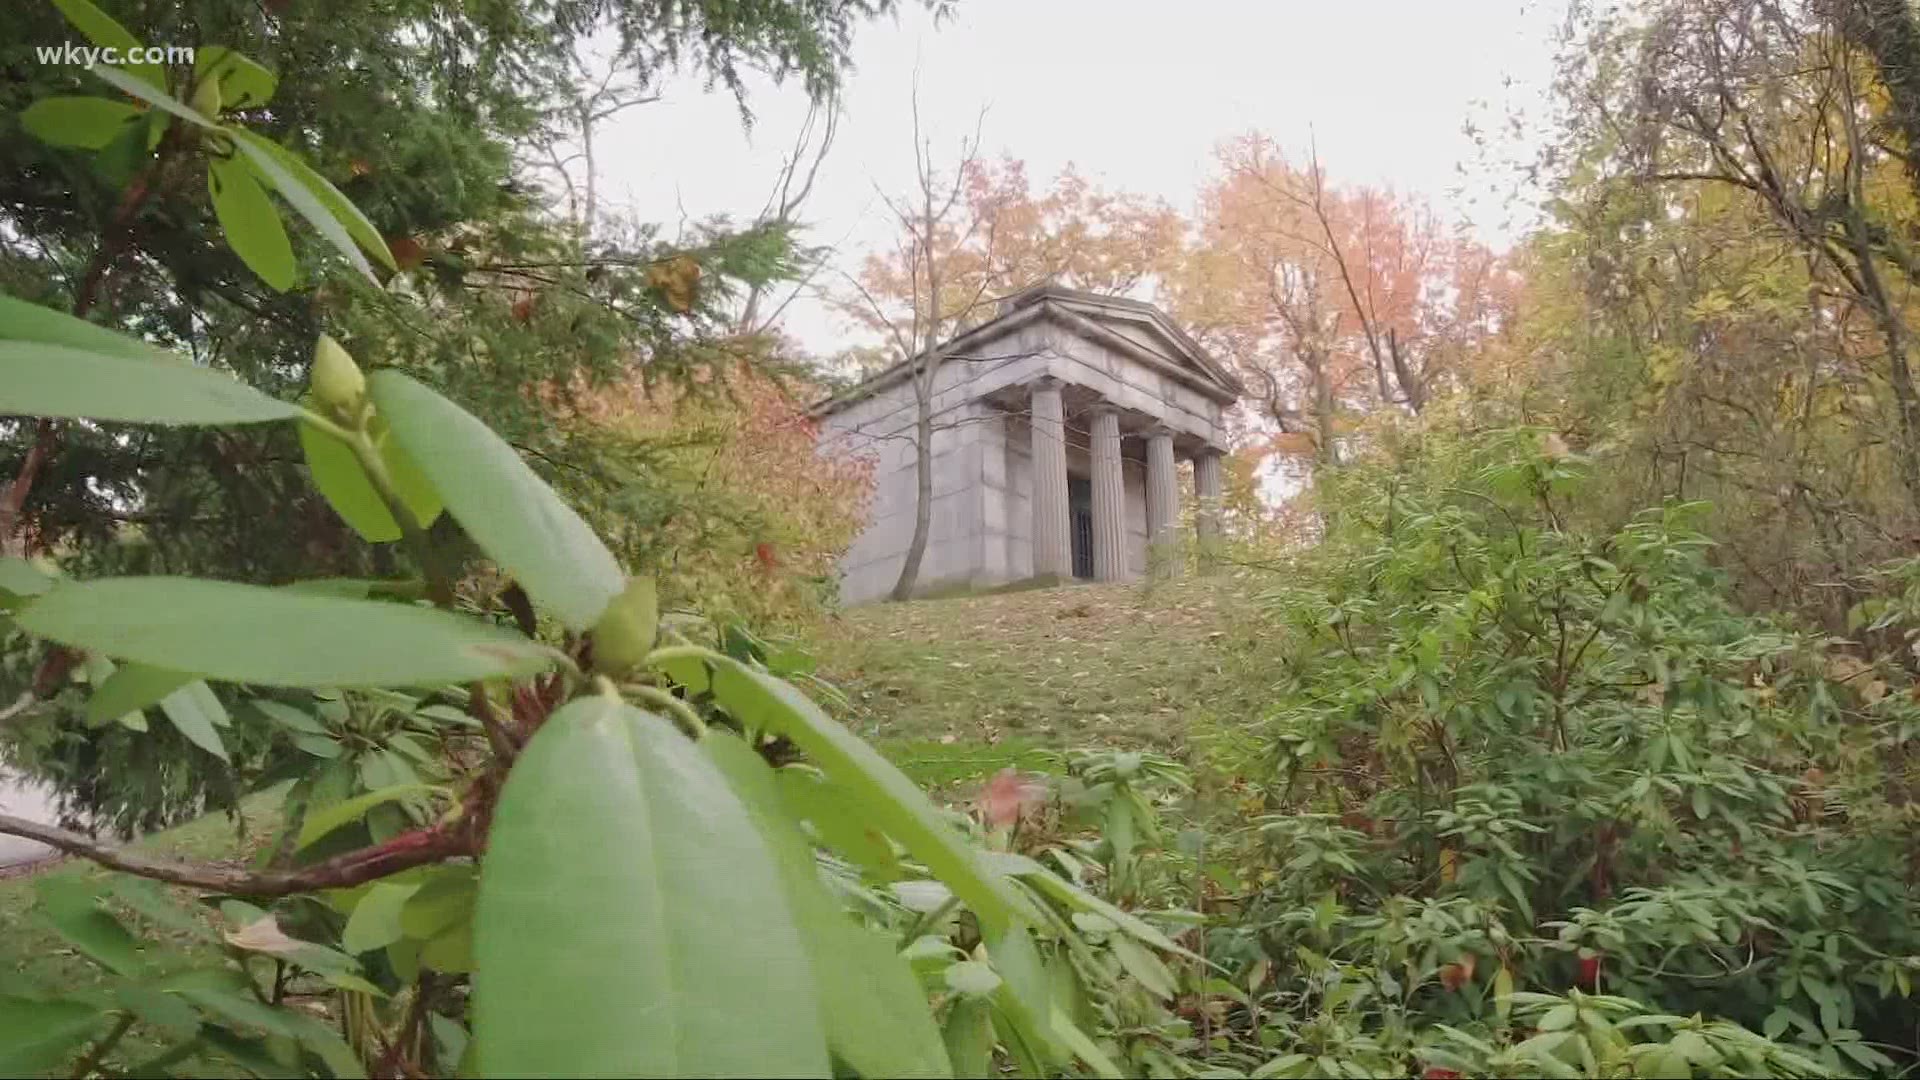 Halloween is tomorrow and many of you may be looking for something spooky to do. 3News' Matt Standridge visits Cleveland's most famous cemetery.